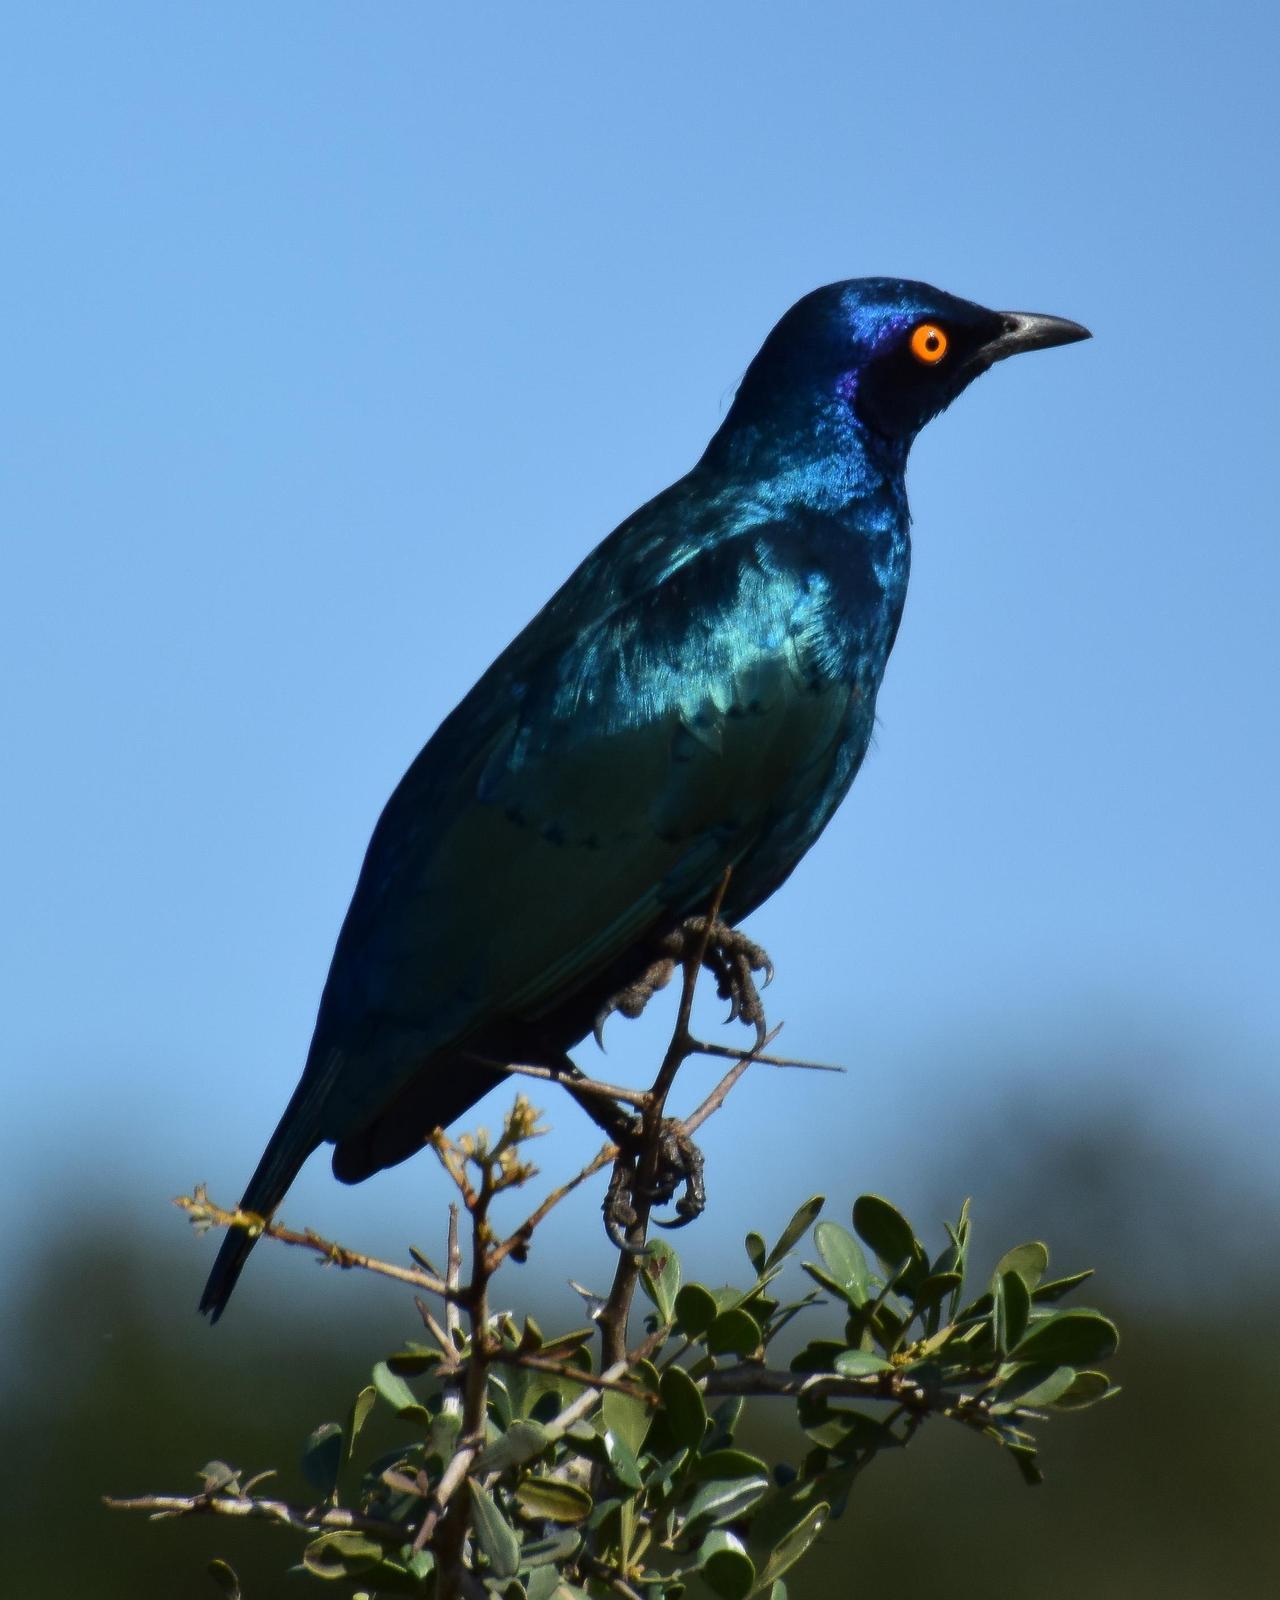 Cape Starling Photo by Steve Percival